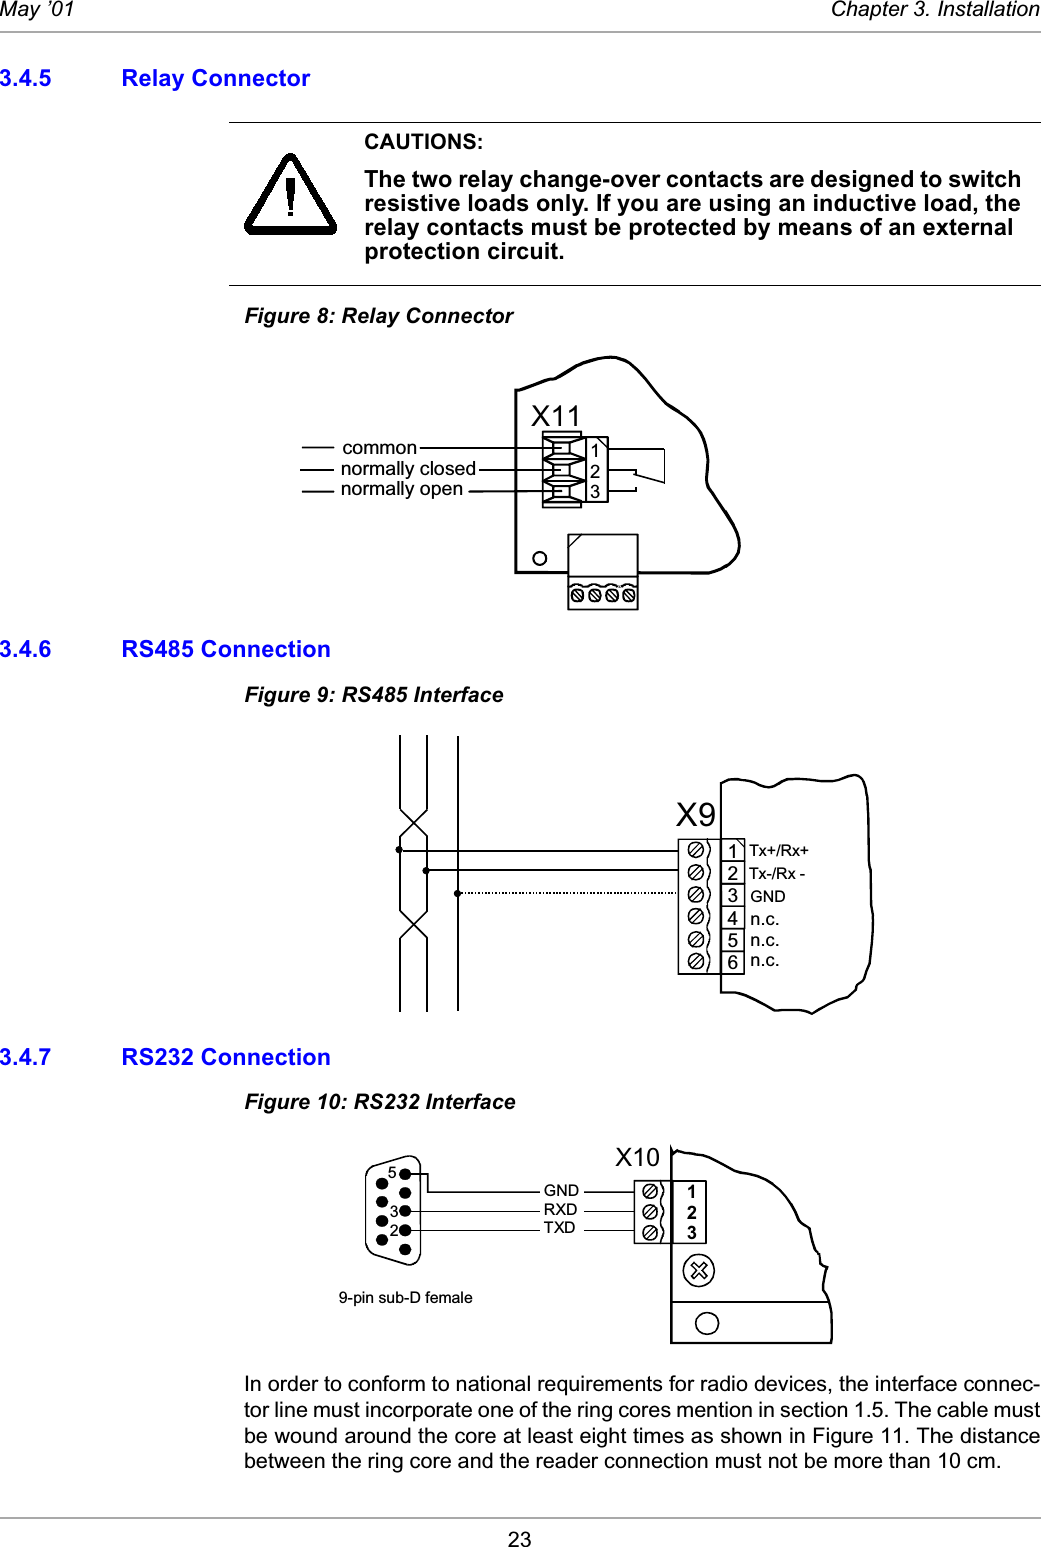 23May ’01 Chapter 3. Installation3.4.5 Relay Connector Figure 8: Relay Connector 3.4.6 RS485 ConnectionFigure 9: RS485 Interface3.4.7 RS232 ConnectionFigure 10: RS232 InterfaceIn order to conform to national requirements for radio devices, the interface connec-tor line must incorporate one of the ring cores mention in section 1.5. The cable mustbe wound around the core at least eight times as shown in Figure 11. The distancebetween the ring core and the reader connection must not be more than 10 cm. CAUTIONS:The two relay change-over contacts are designed to switch resistive loads only. If you are using an inductive load, the relay contacts must be protected by means of an external protection circuit. X11123commonnormally opennormally closed123456X9  Tx+/Rx+   Tx-/Rx - GNDn.c.n.c.n.c.123X10 GND  RXD  TXD 5329-pin sub-D female